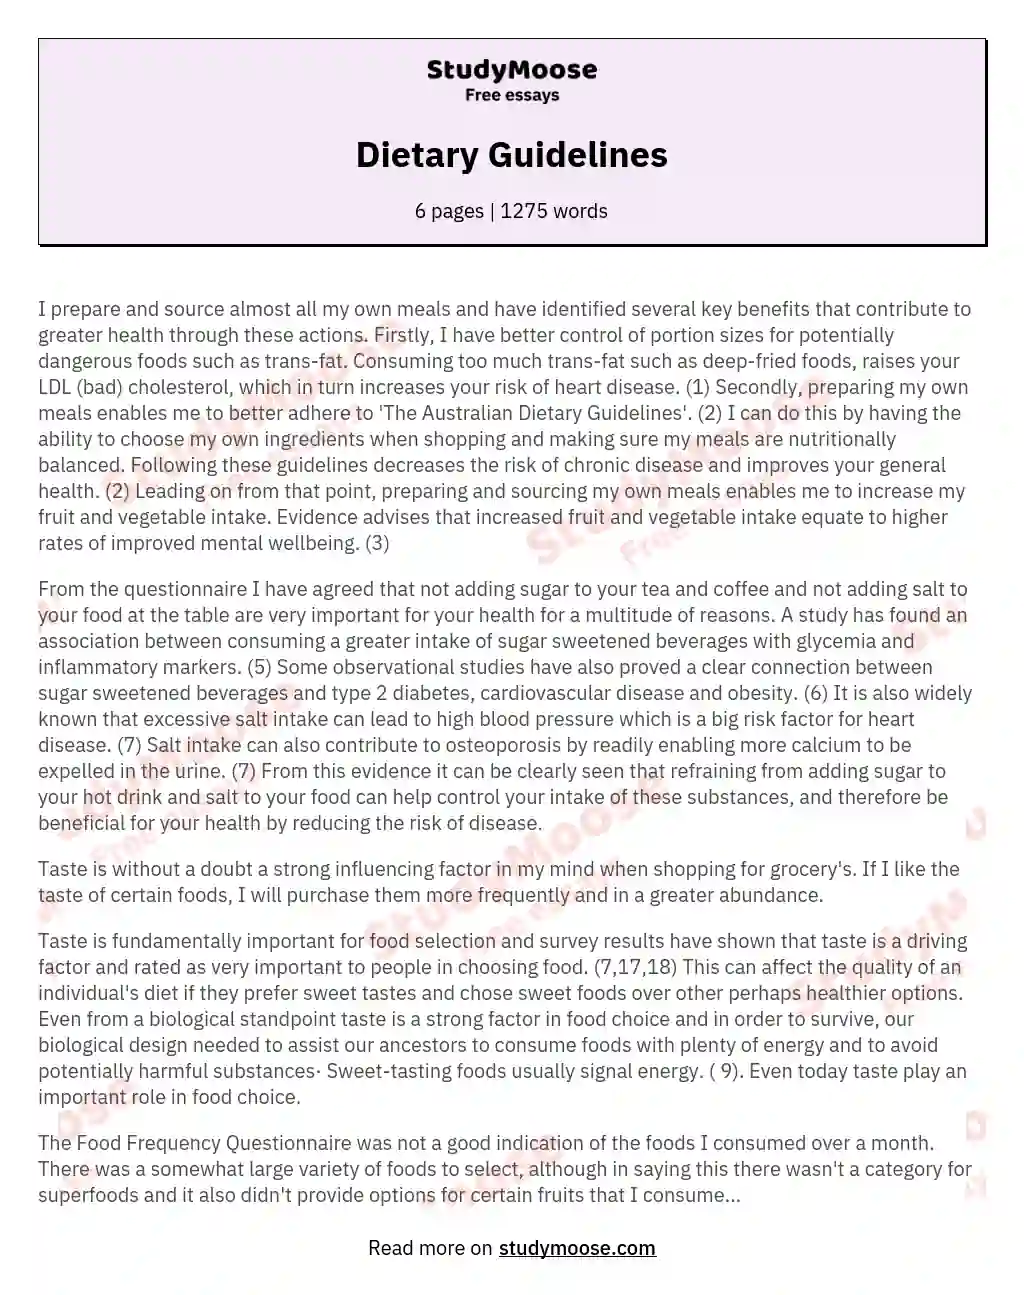 Dietary Guidelines essay